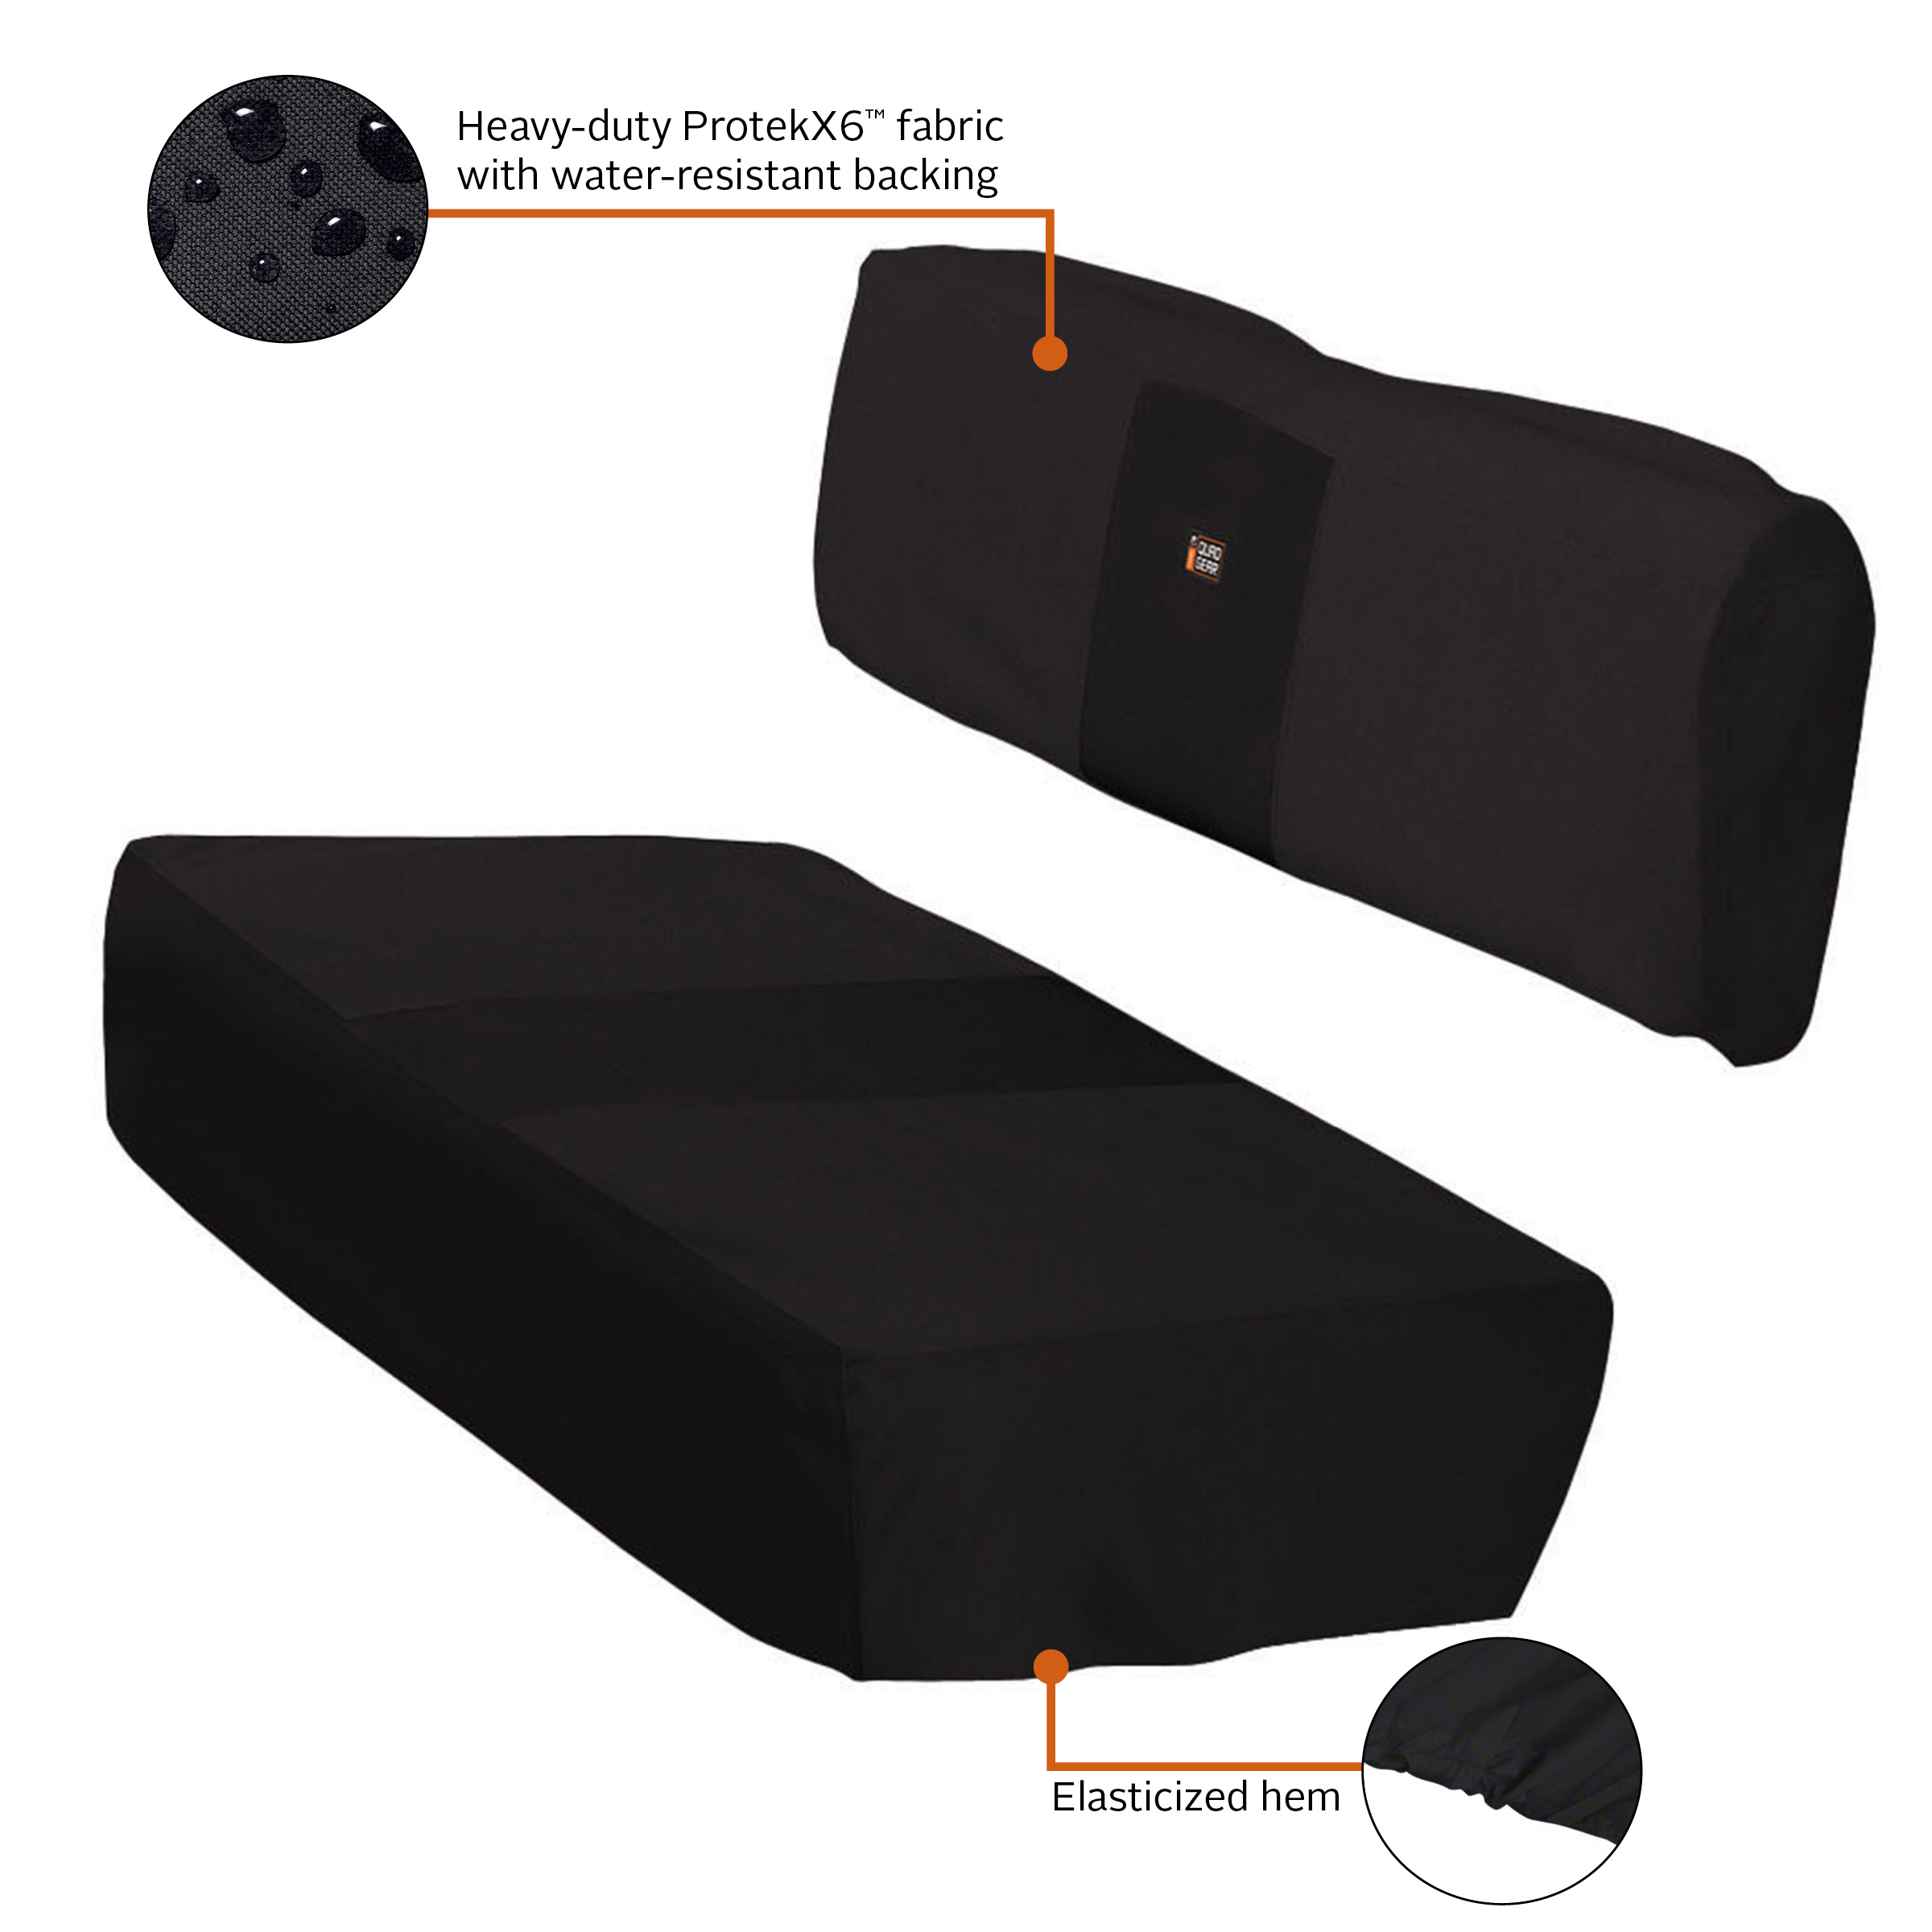 Classic Accessories QuadGear UTV Bench Seat Cover, Fits Kawasaki Mule 4000/4010 (2015 models and older), Black - image 3 of 7